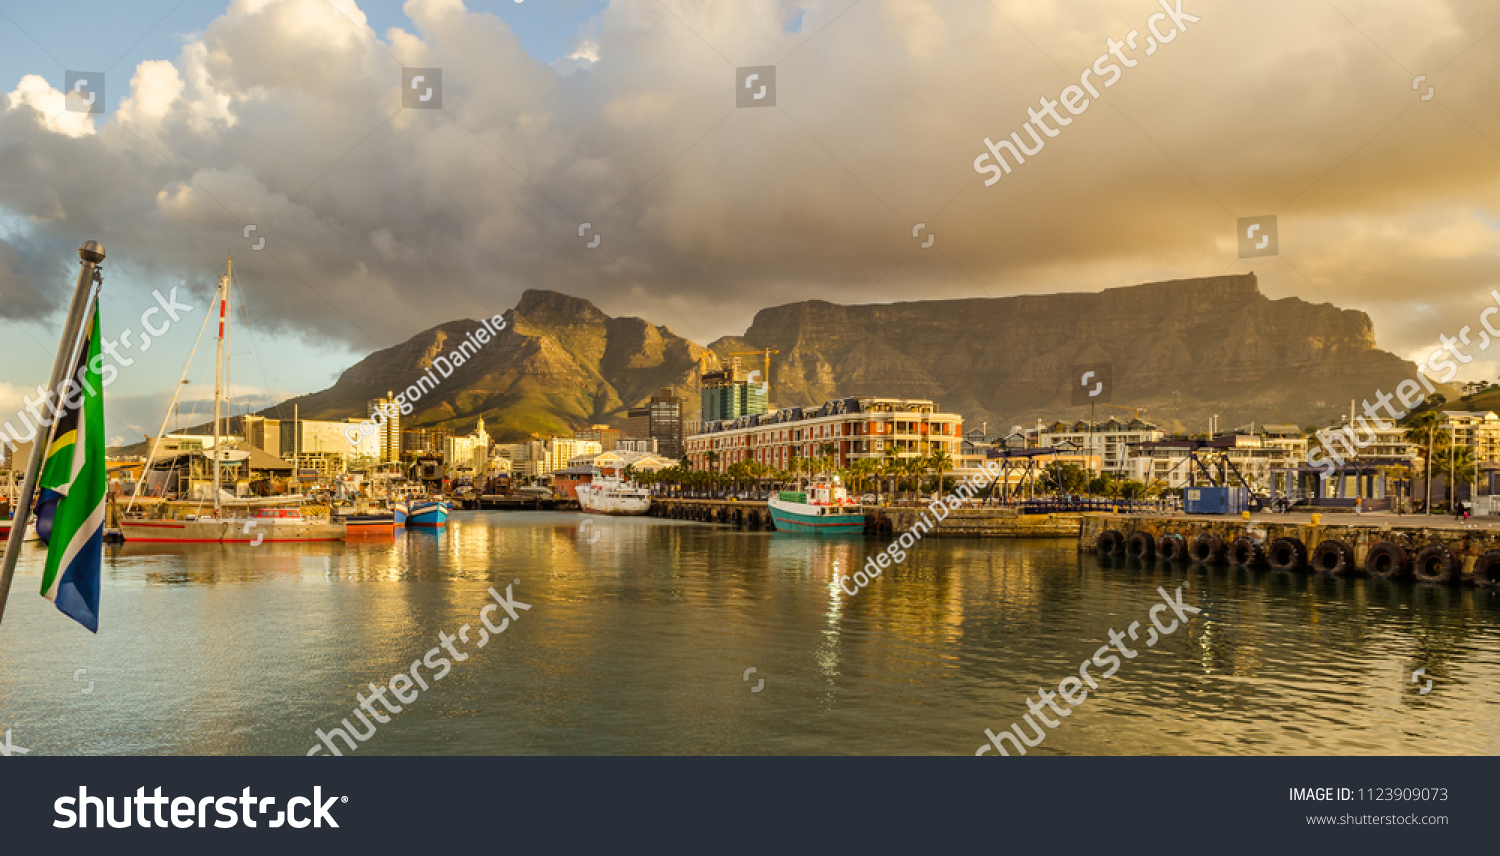 Cape Town harbor, Victoria and Alfred Waterfront at sunset with south african flag. Table mountain in background, South Africa beautiful destination